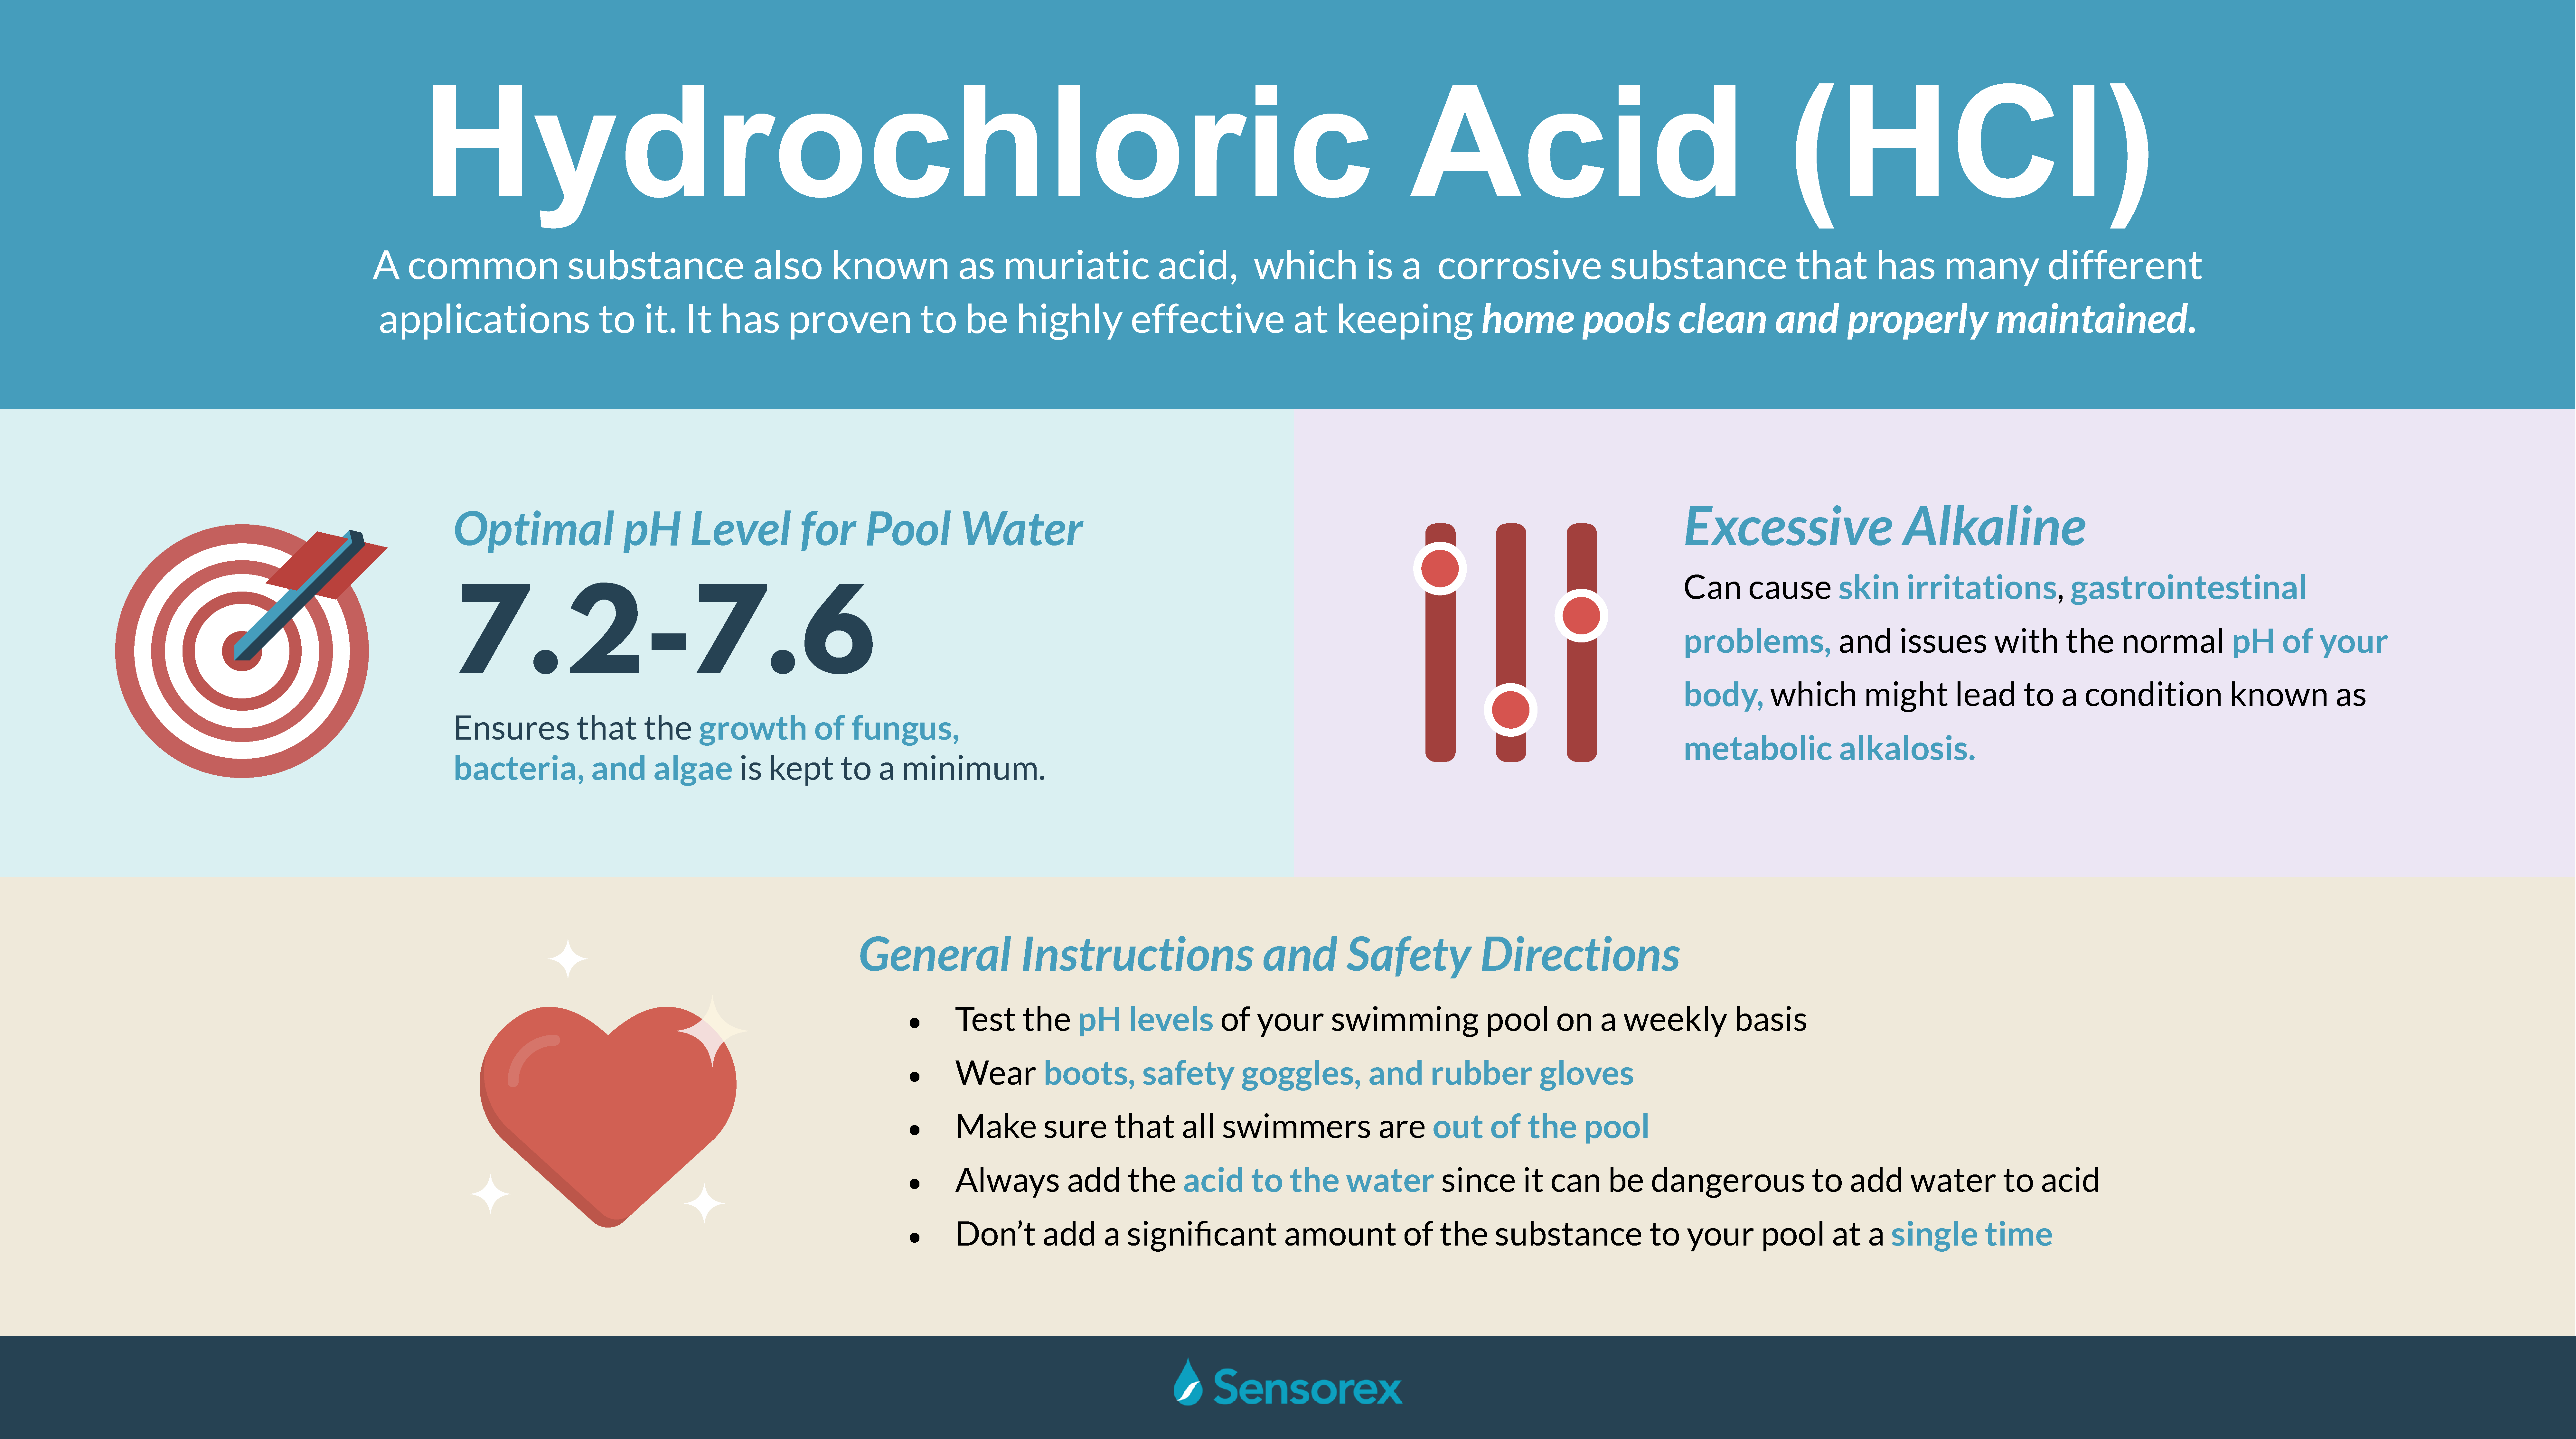 hydrochloric acid infographic hcl safety guidelines instructions